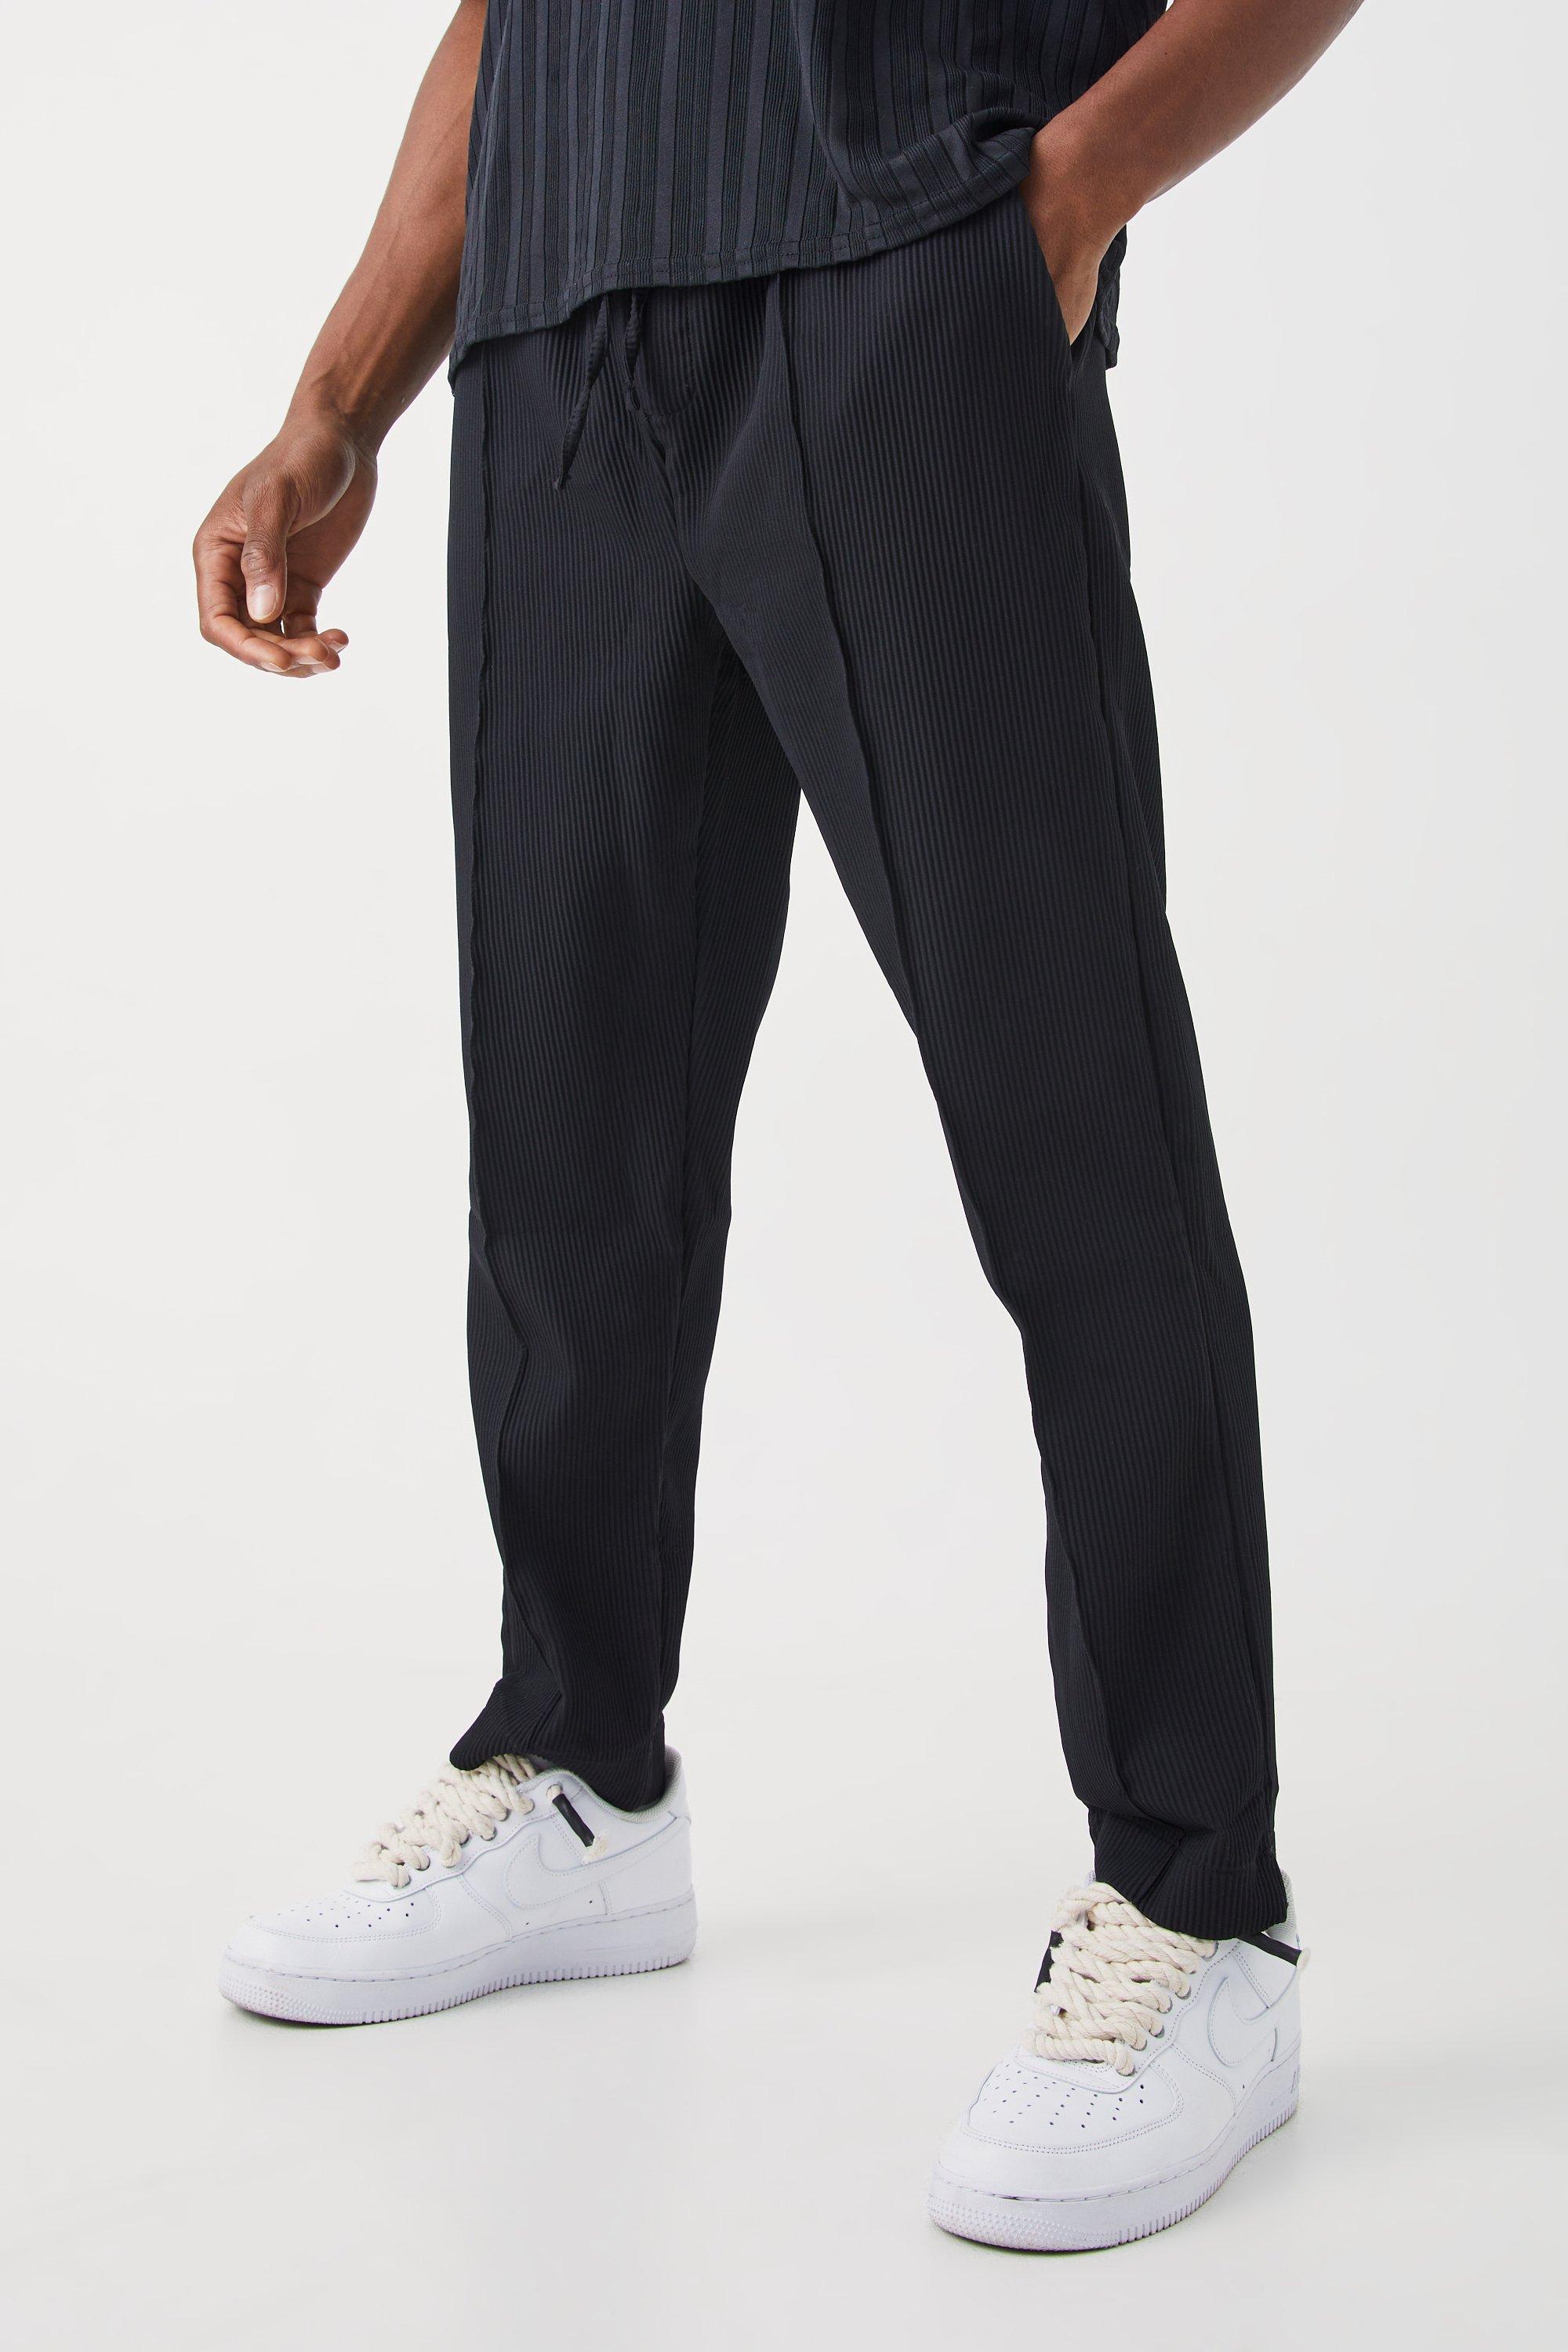 Go-To Pleated Pants